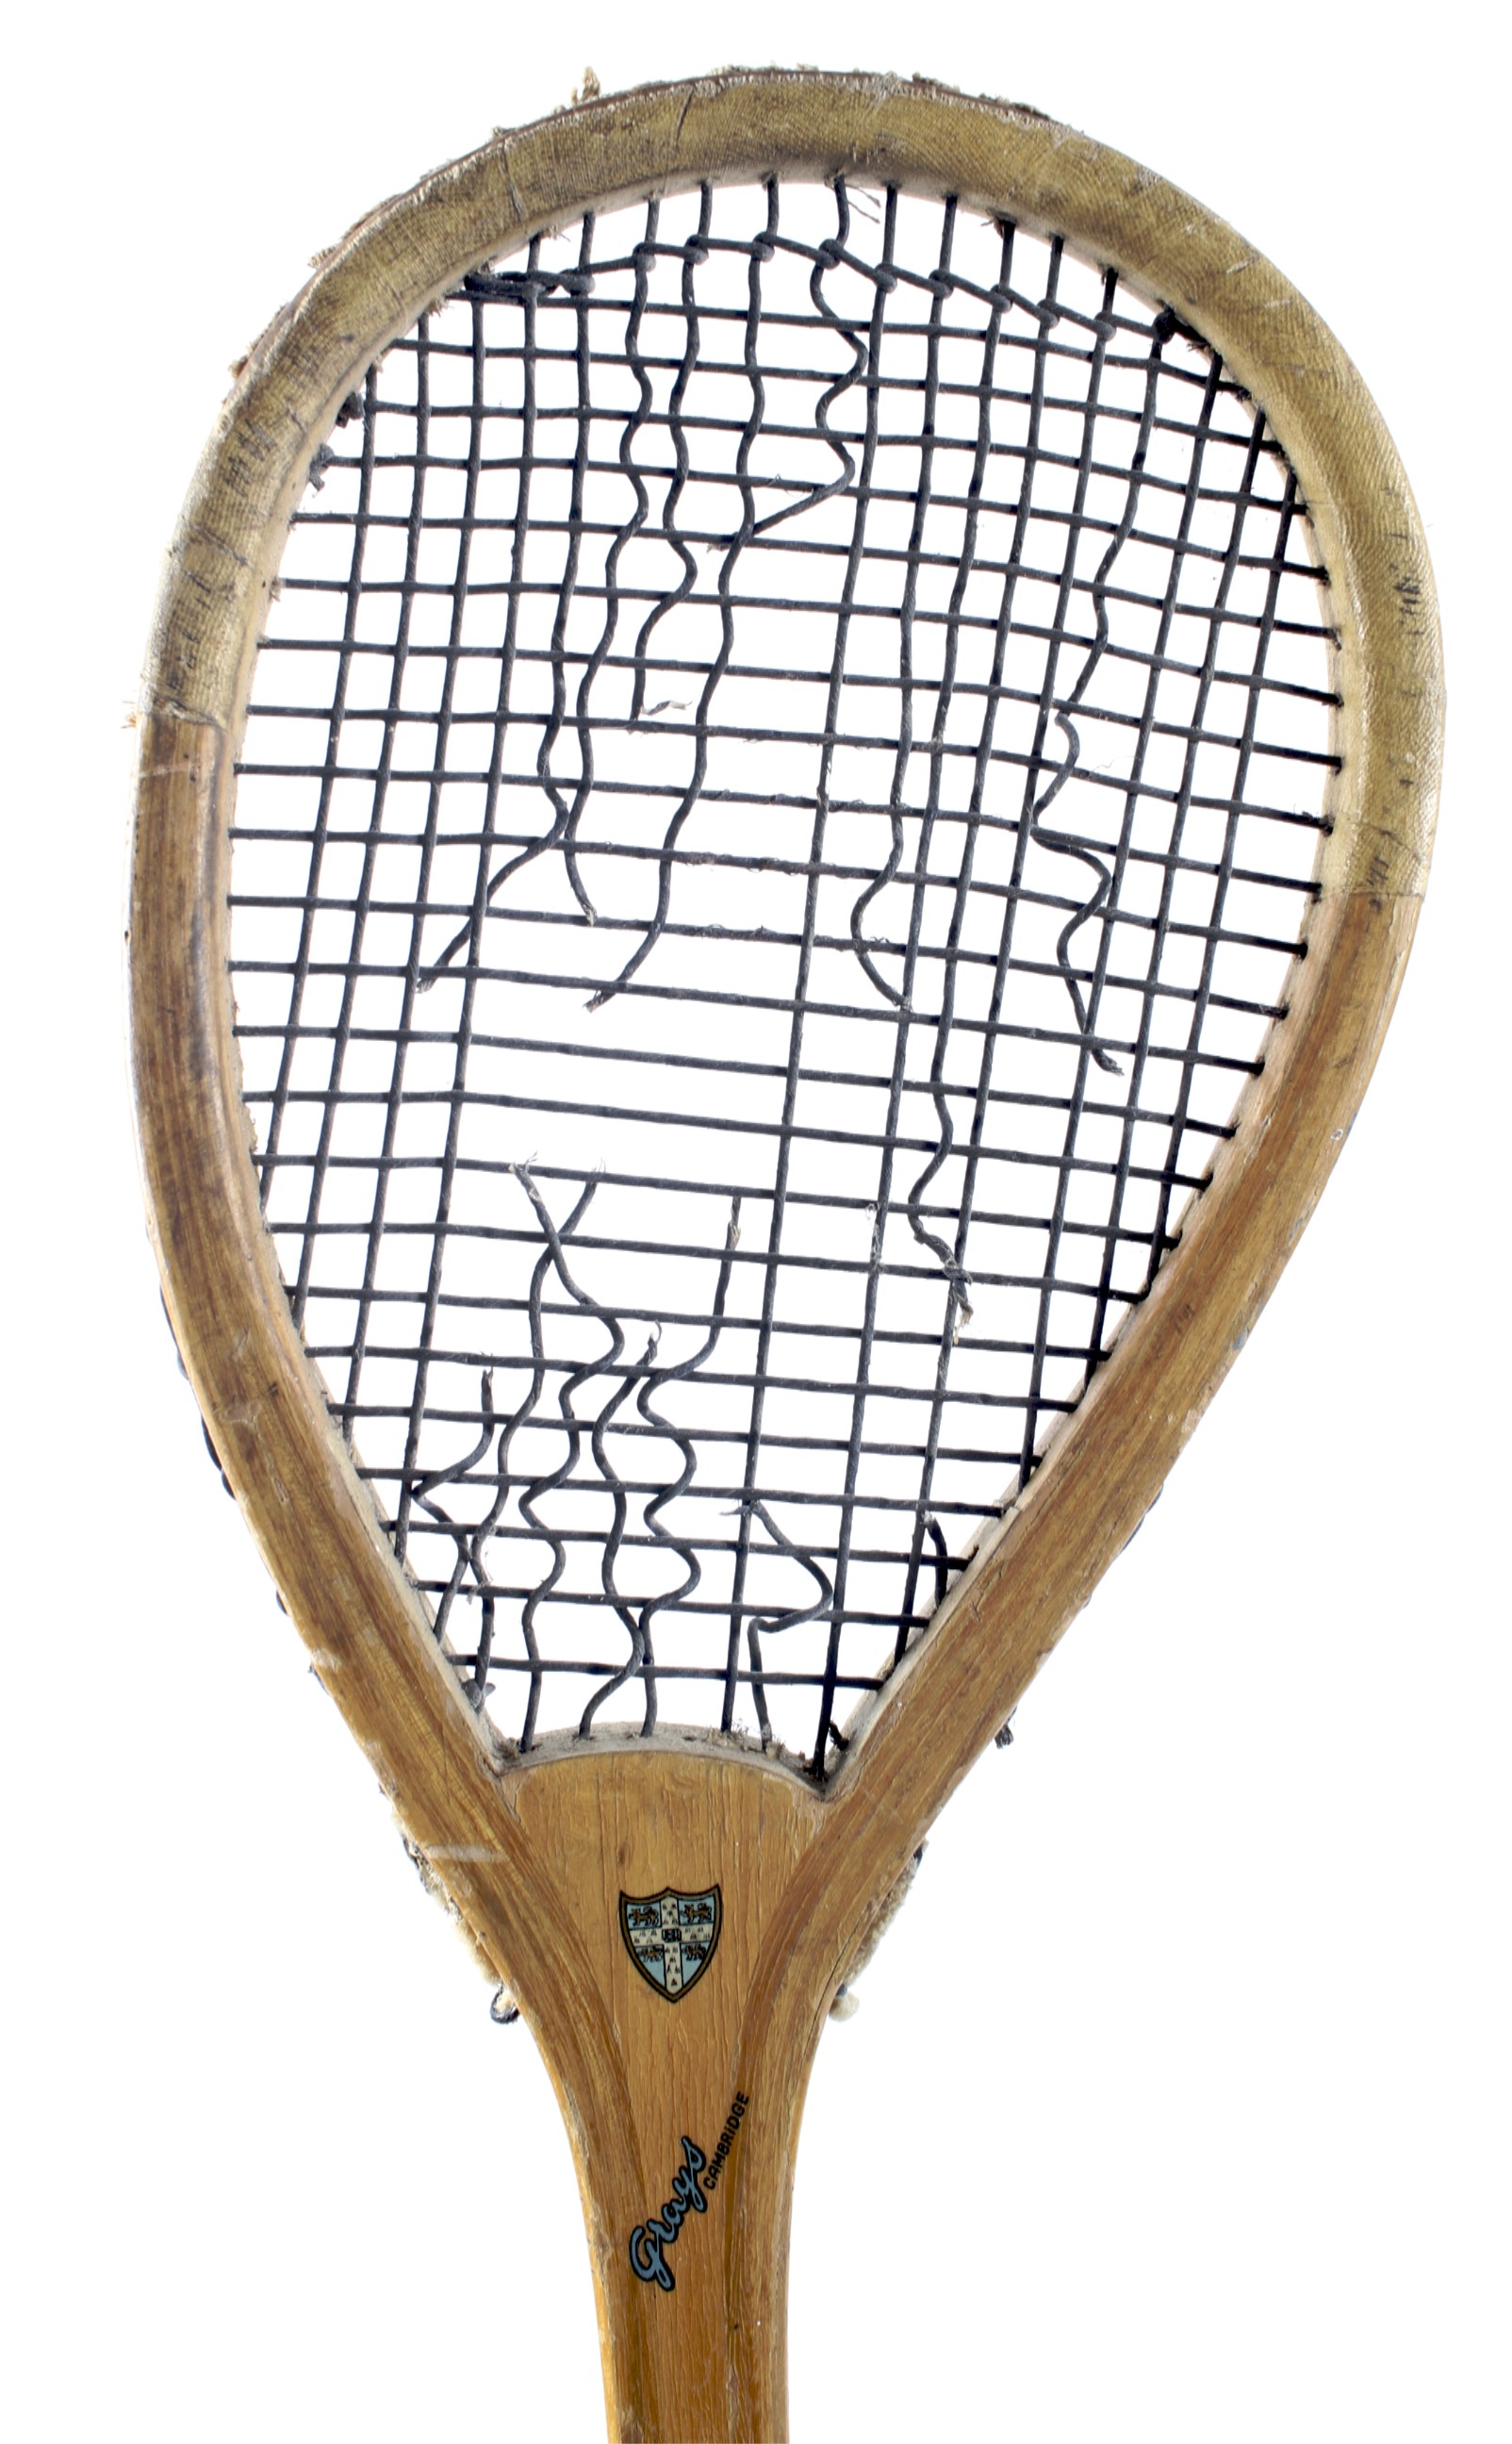 Three vintage tennis rackets, including a Grays "real" tennis racket and two Slazengers, - Image 2 of 2